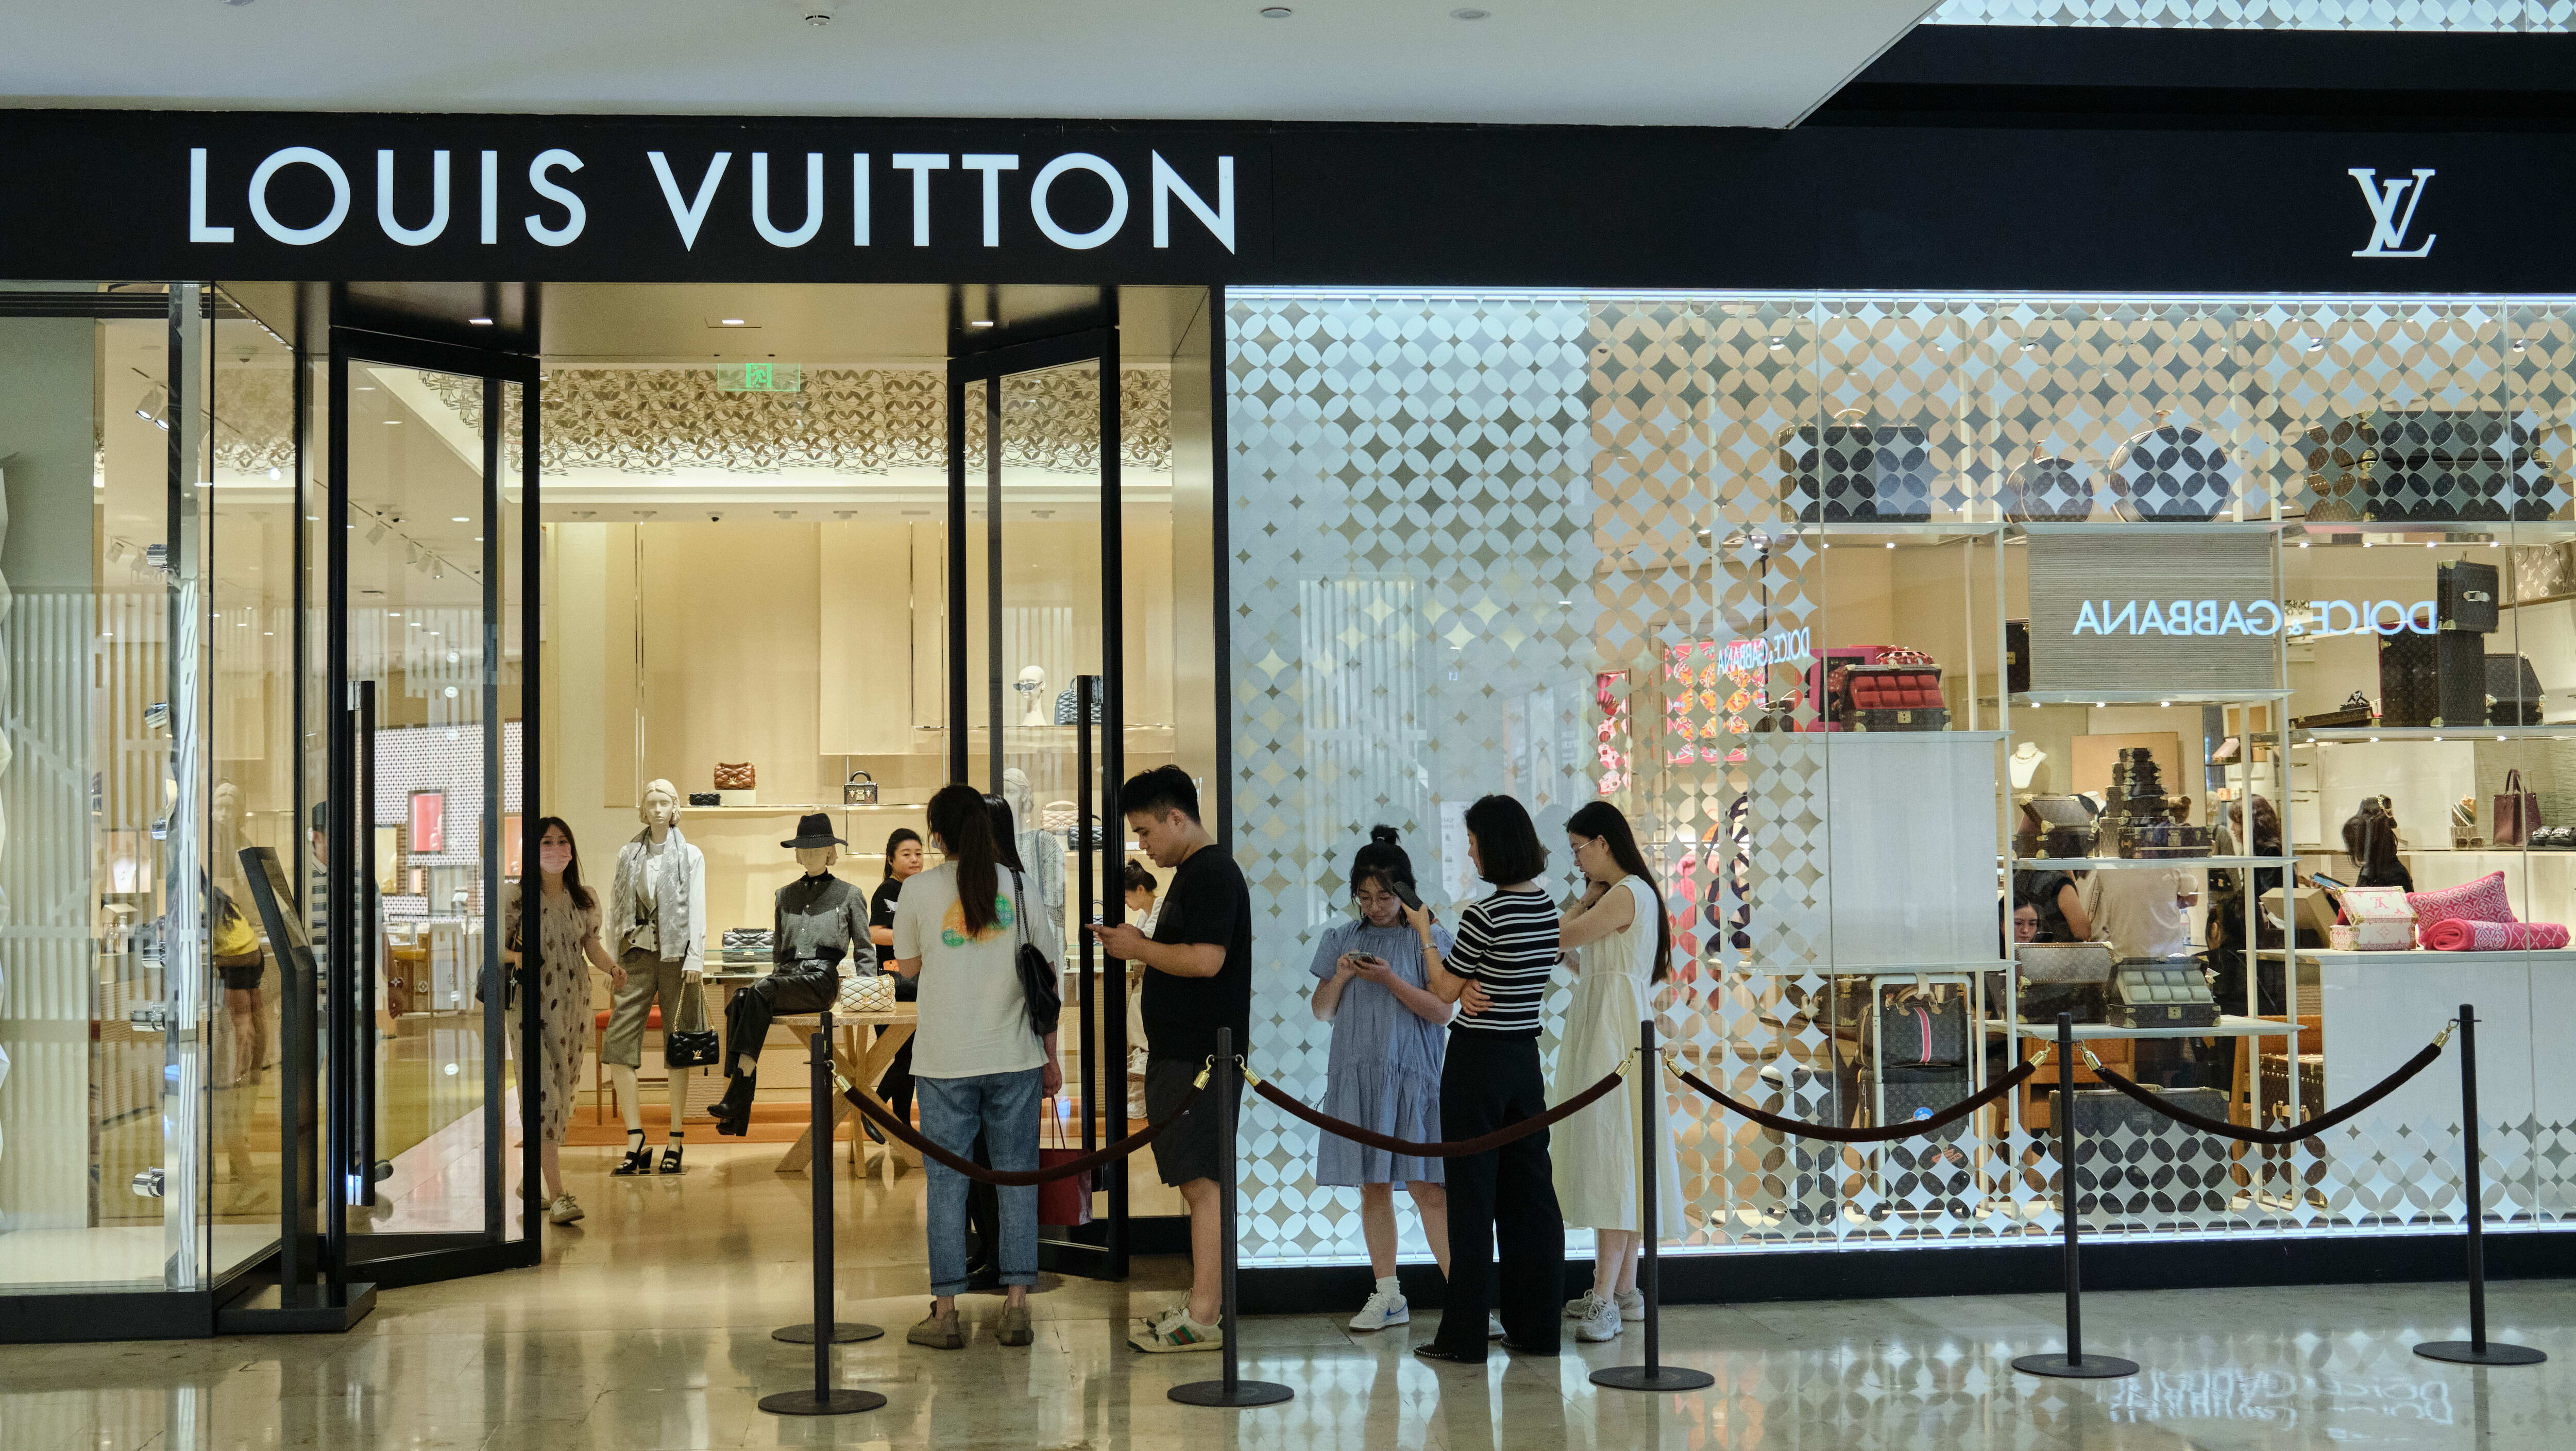 Stock market: Stock Warrants allow LVMH to bet on a 44% gain in two months  - Luxus Plus